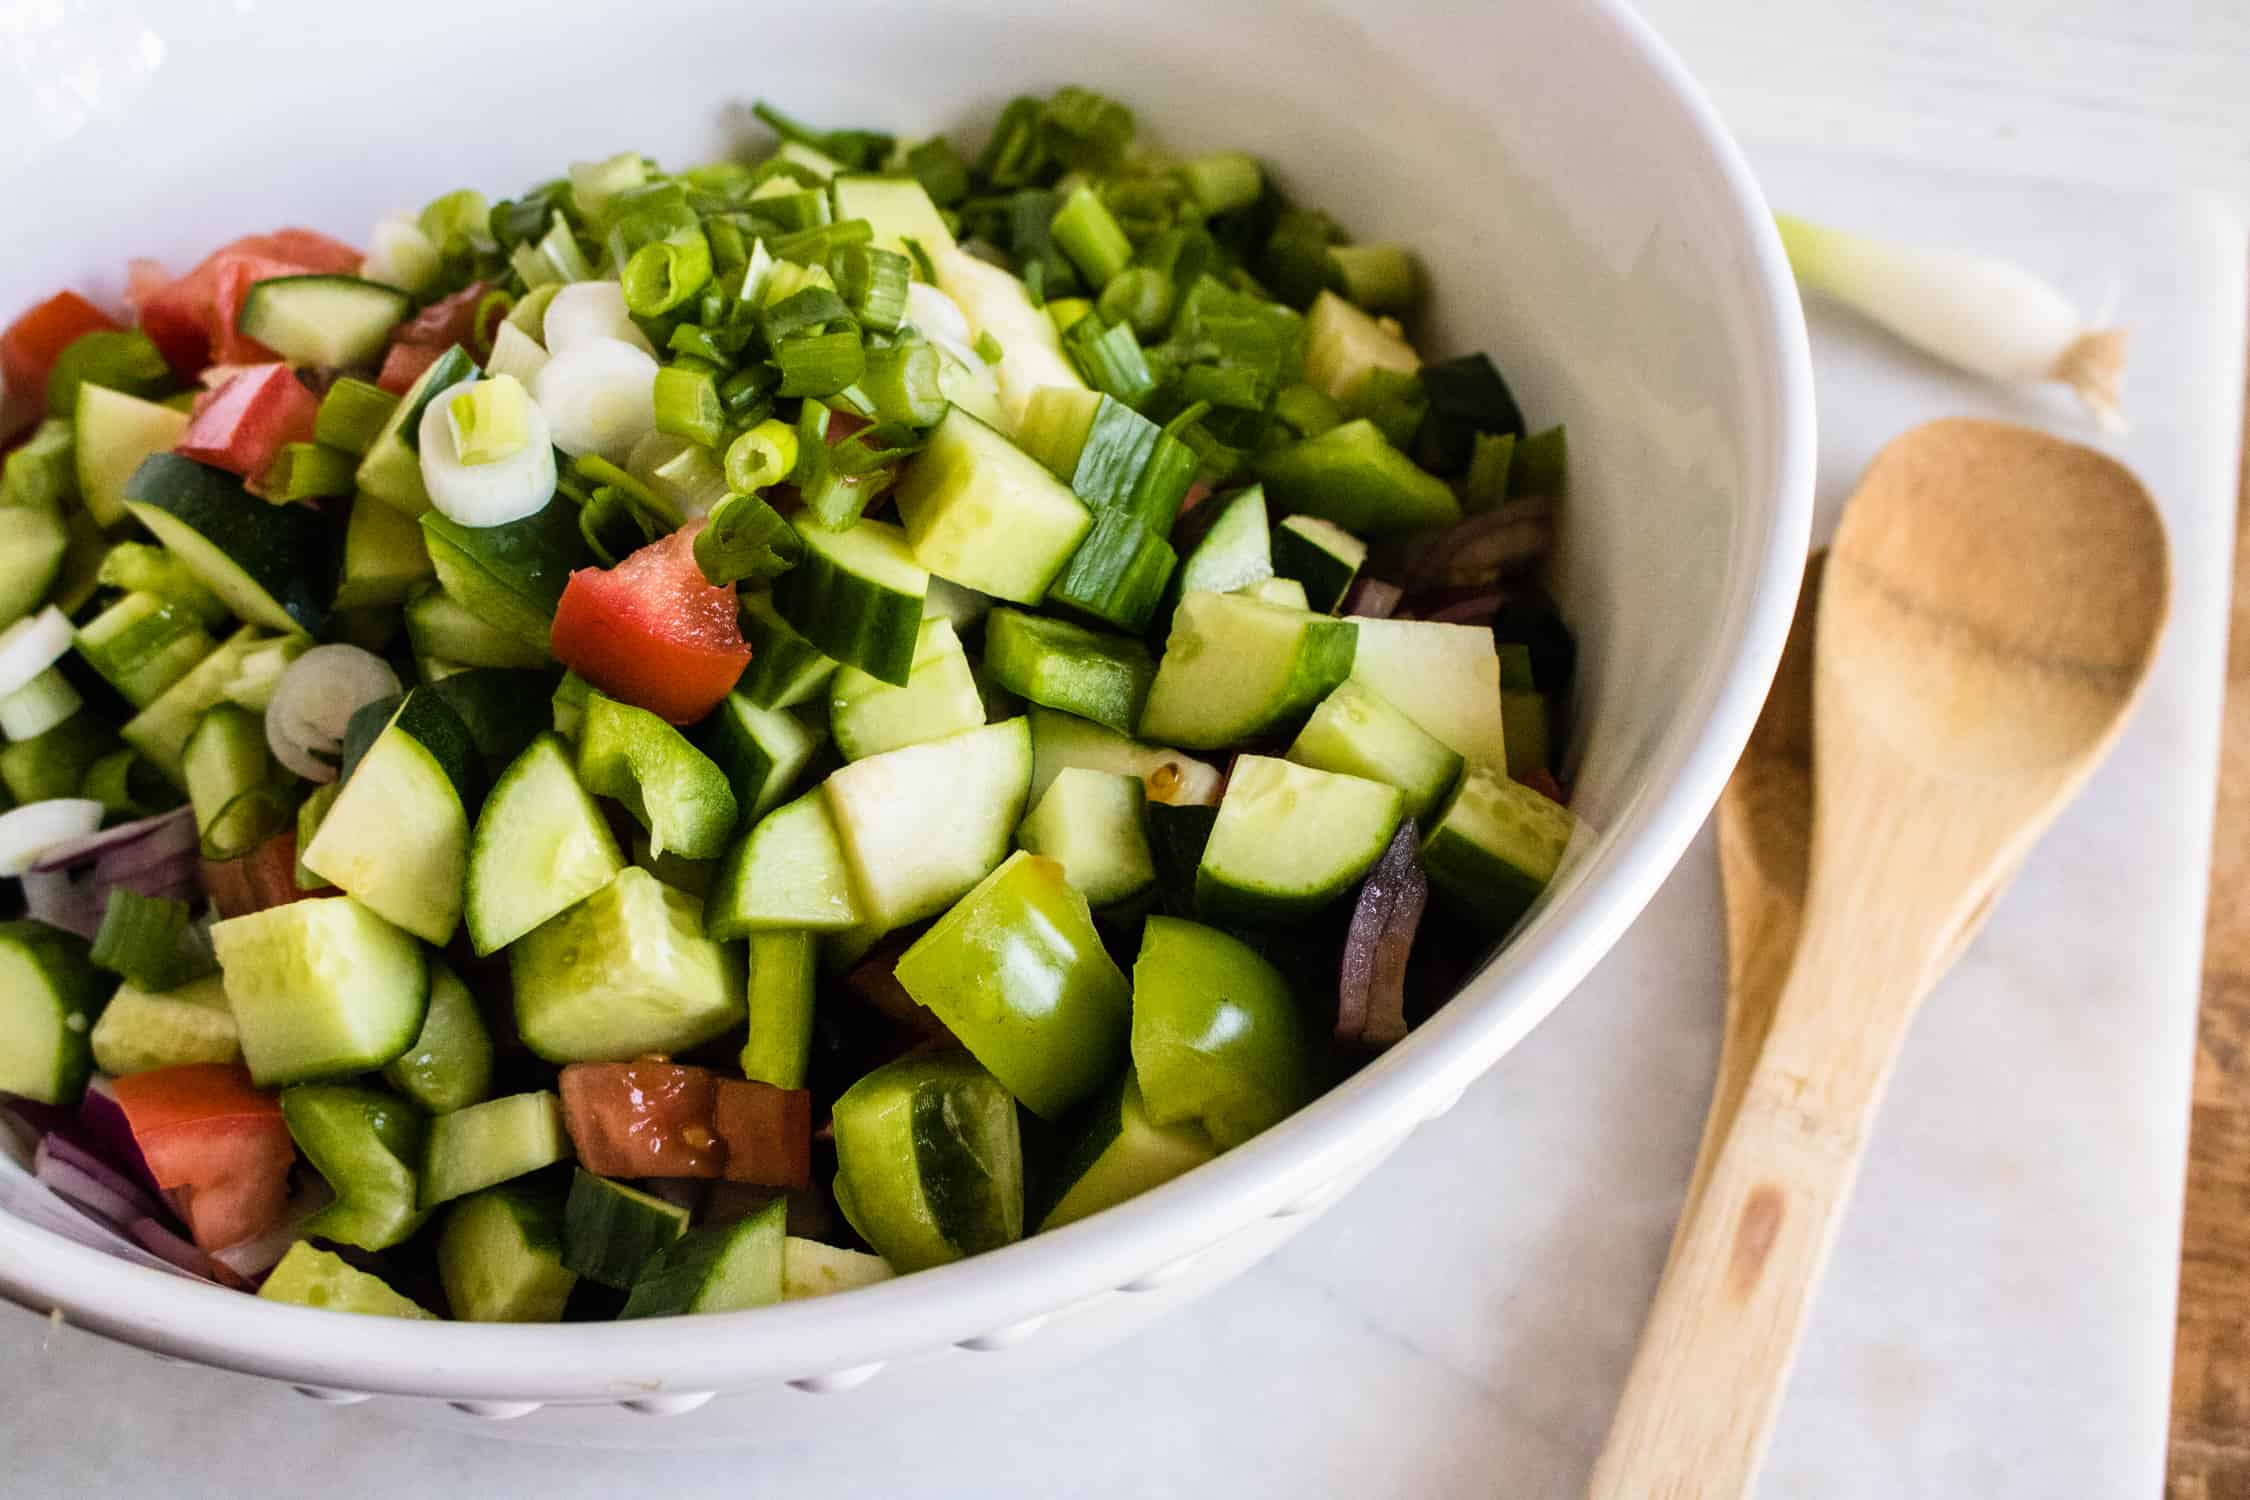 Chopped zucchini, tomatoes, olives, red and green onions mixed together in a large bowl